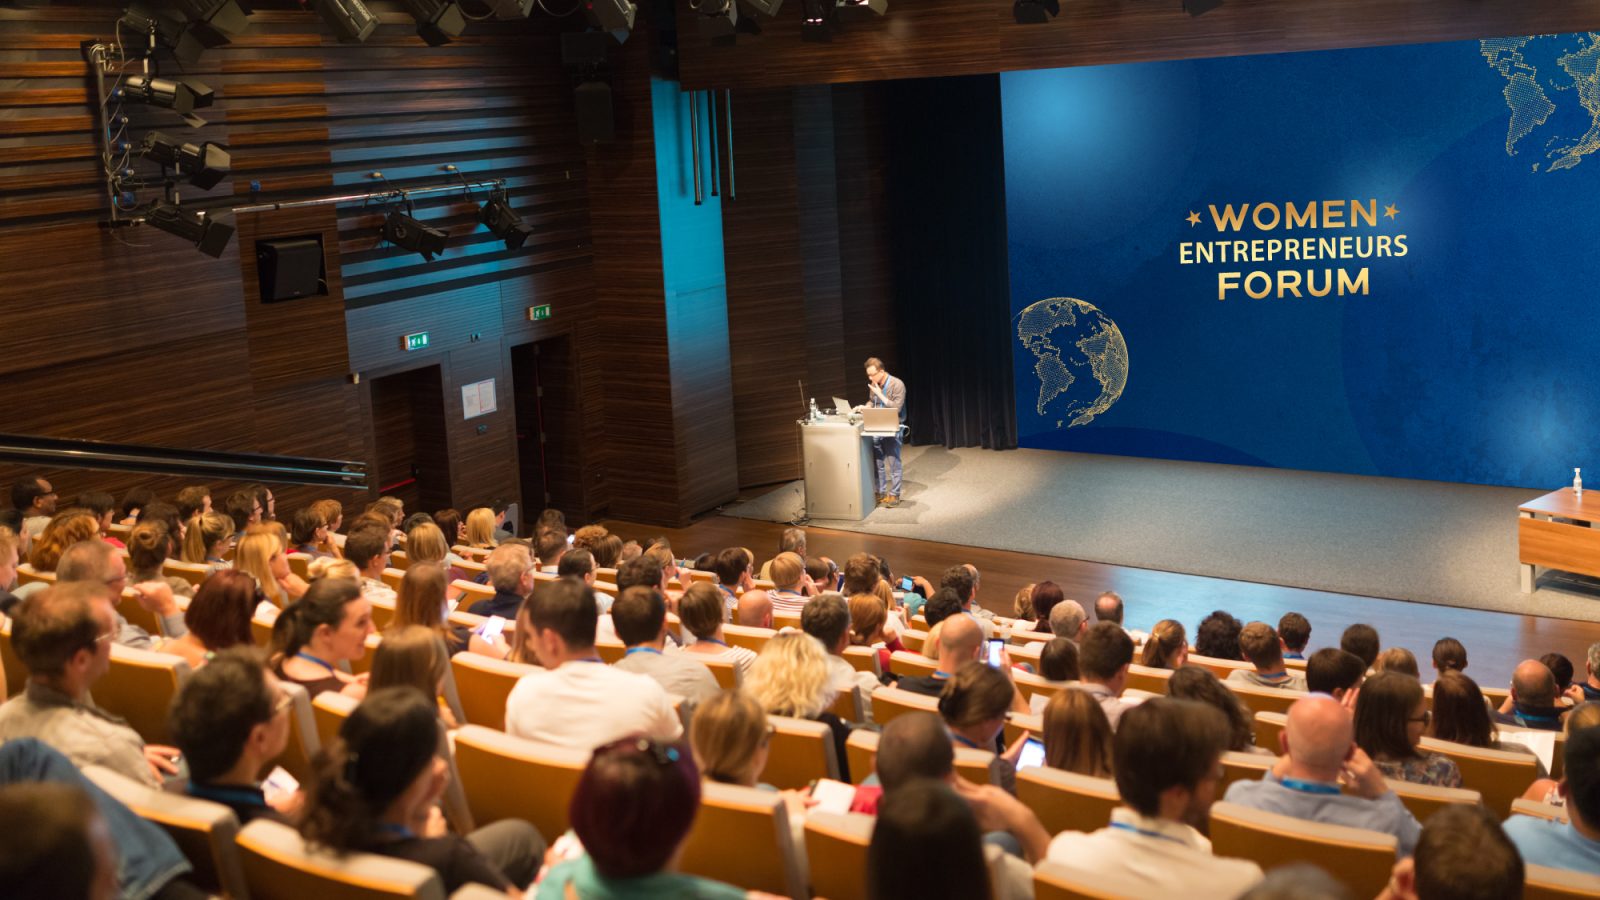 Person standing at podium in auditorium with WEF logo in background.